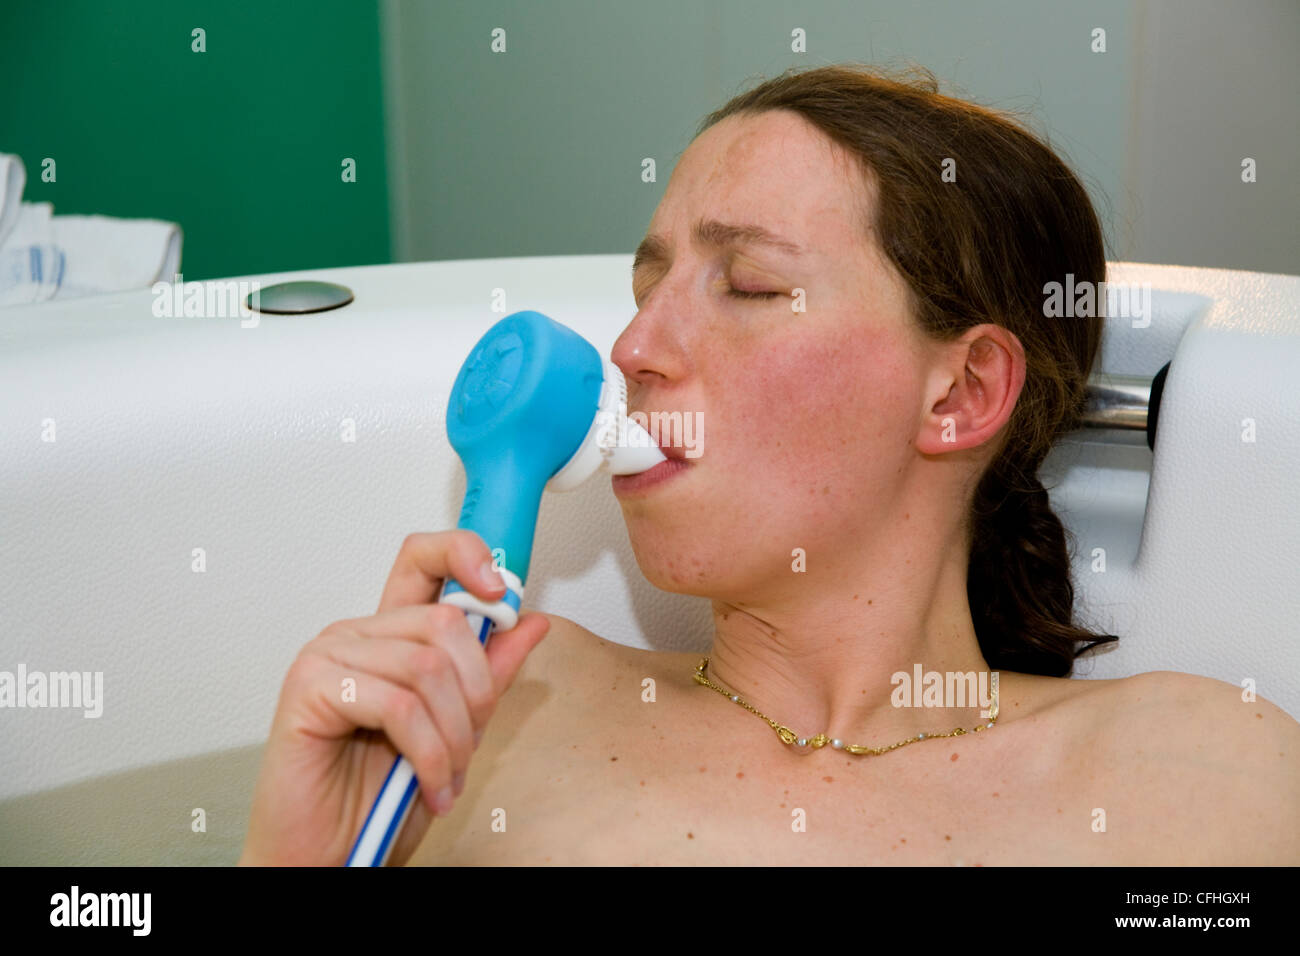 Pregnant woman in labour / labor / during childbirth / giving birth breathes / breathing gas and air pain killer / painkiller. Stock Photo